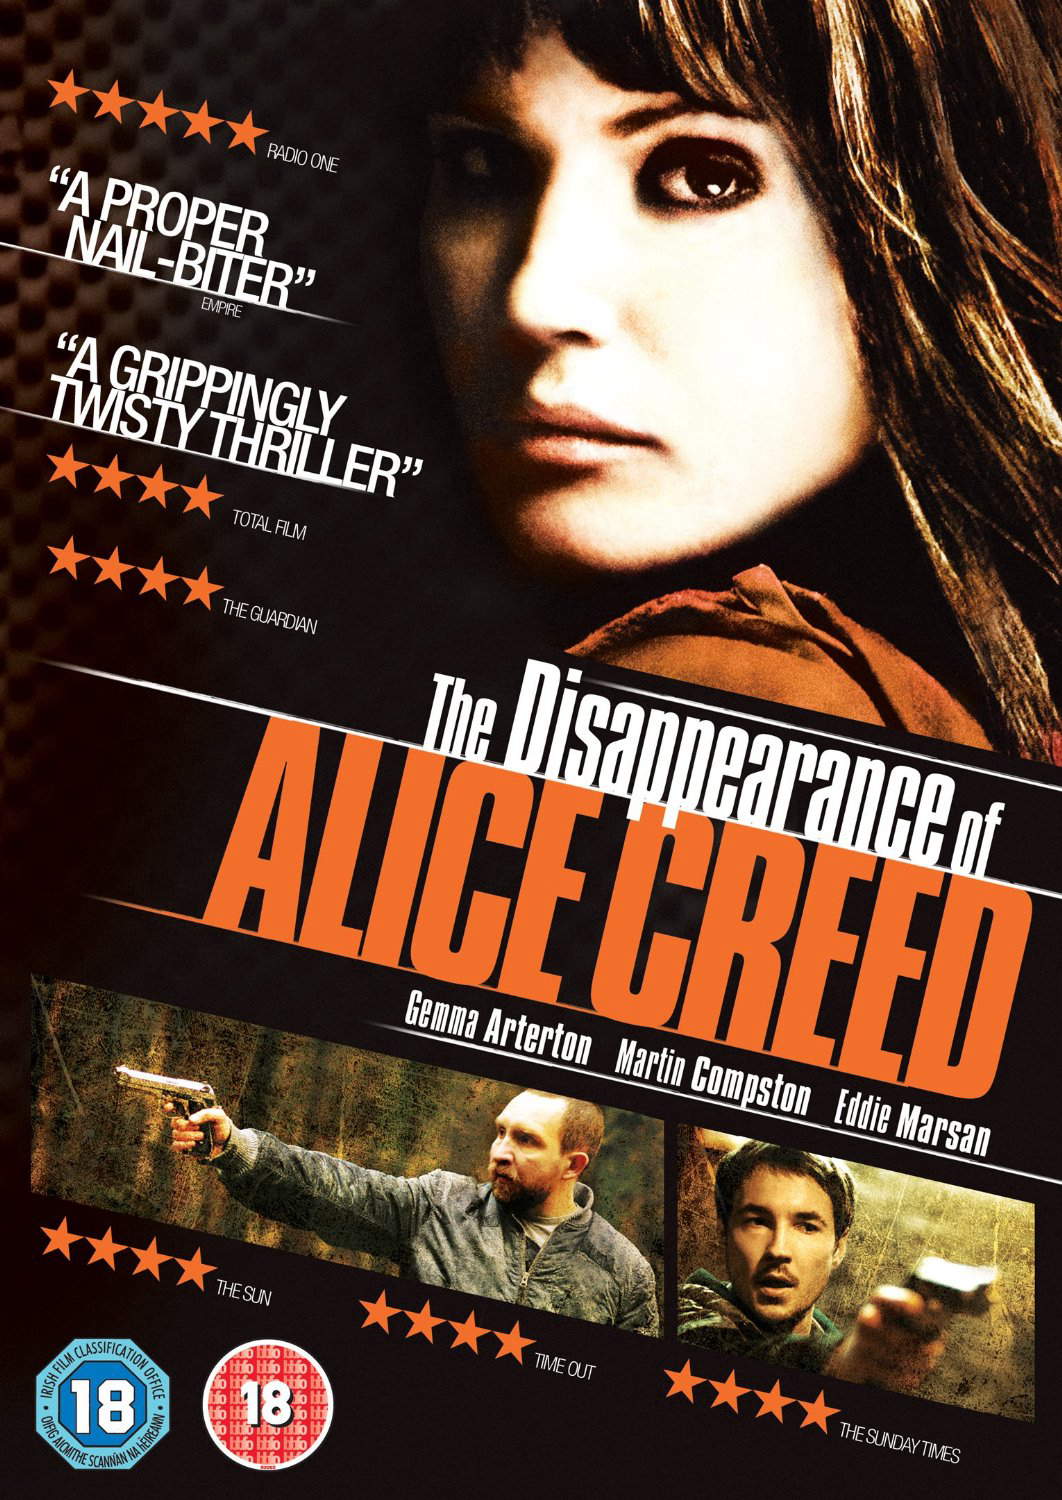 Xem Phim Vụ Bắt Cóc Alice Creed (The Disappearance of Alice Creed)